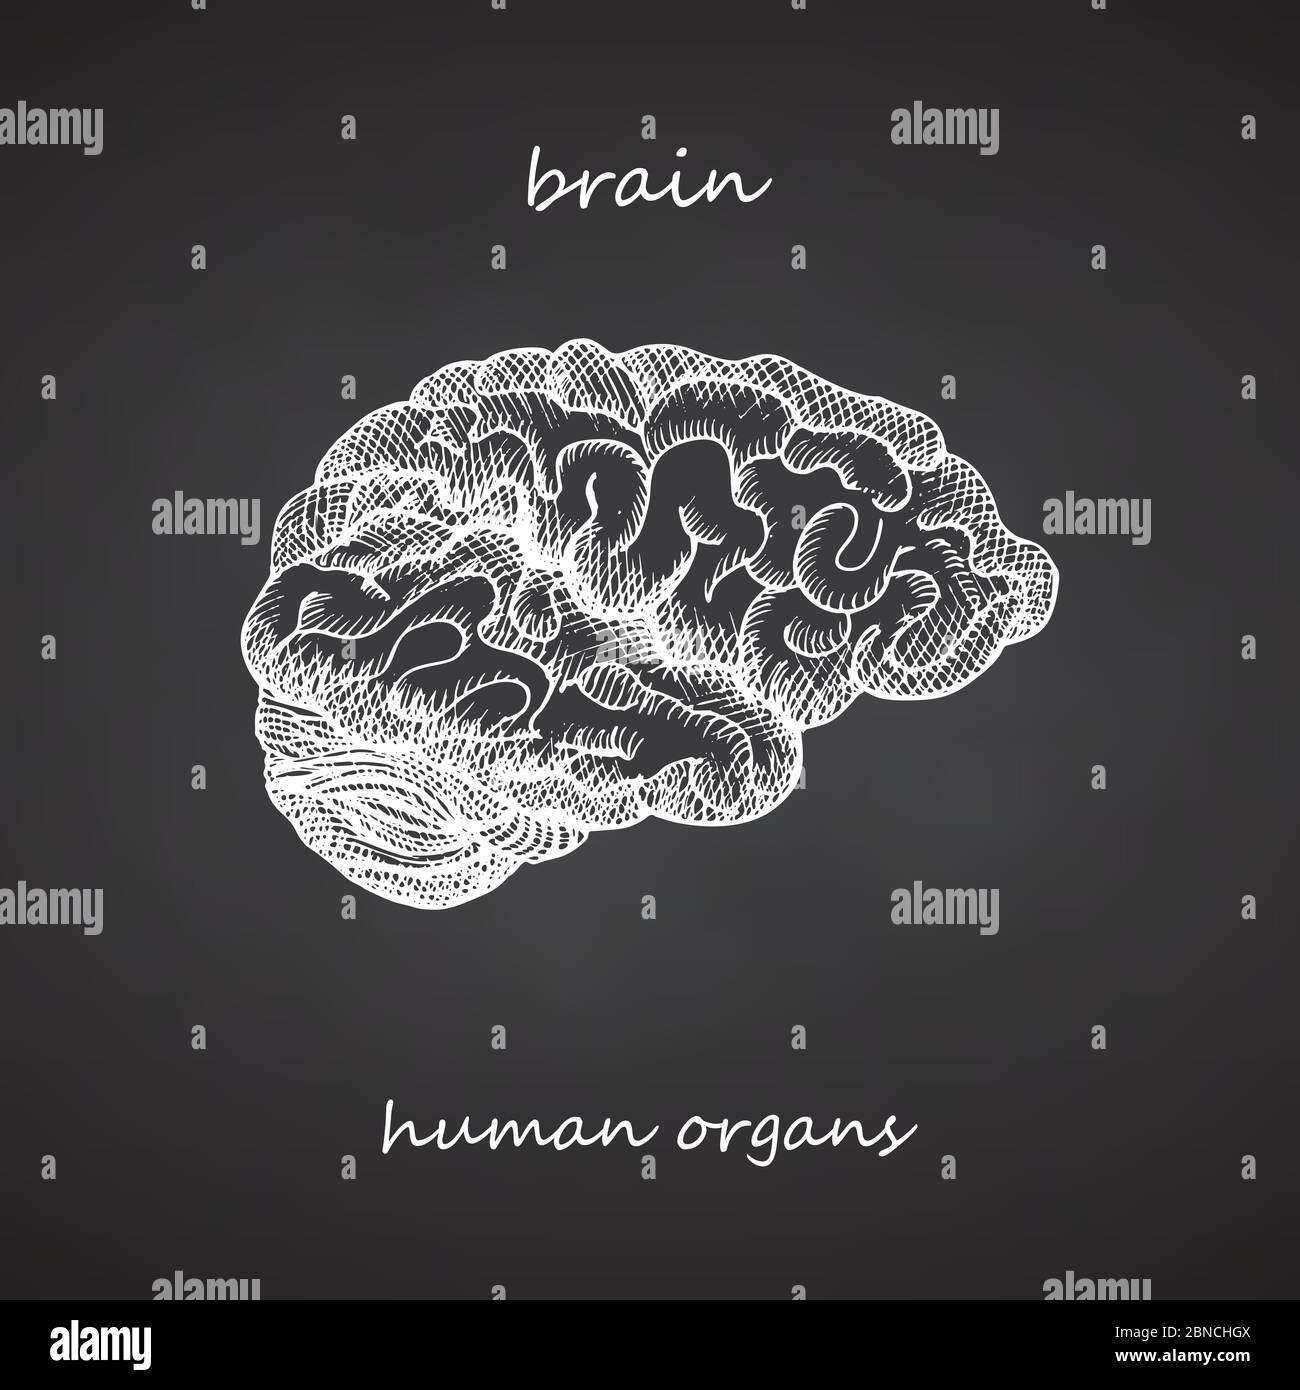 Brain. Realistic hand-drawn icon of human internal organs on chalkboard. Engraving art. Sketch style. Design concept for your medical projects post Stock Vector